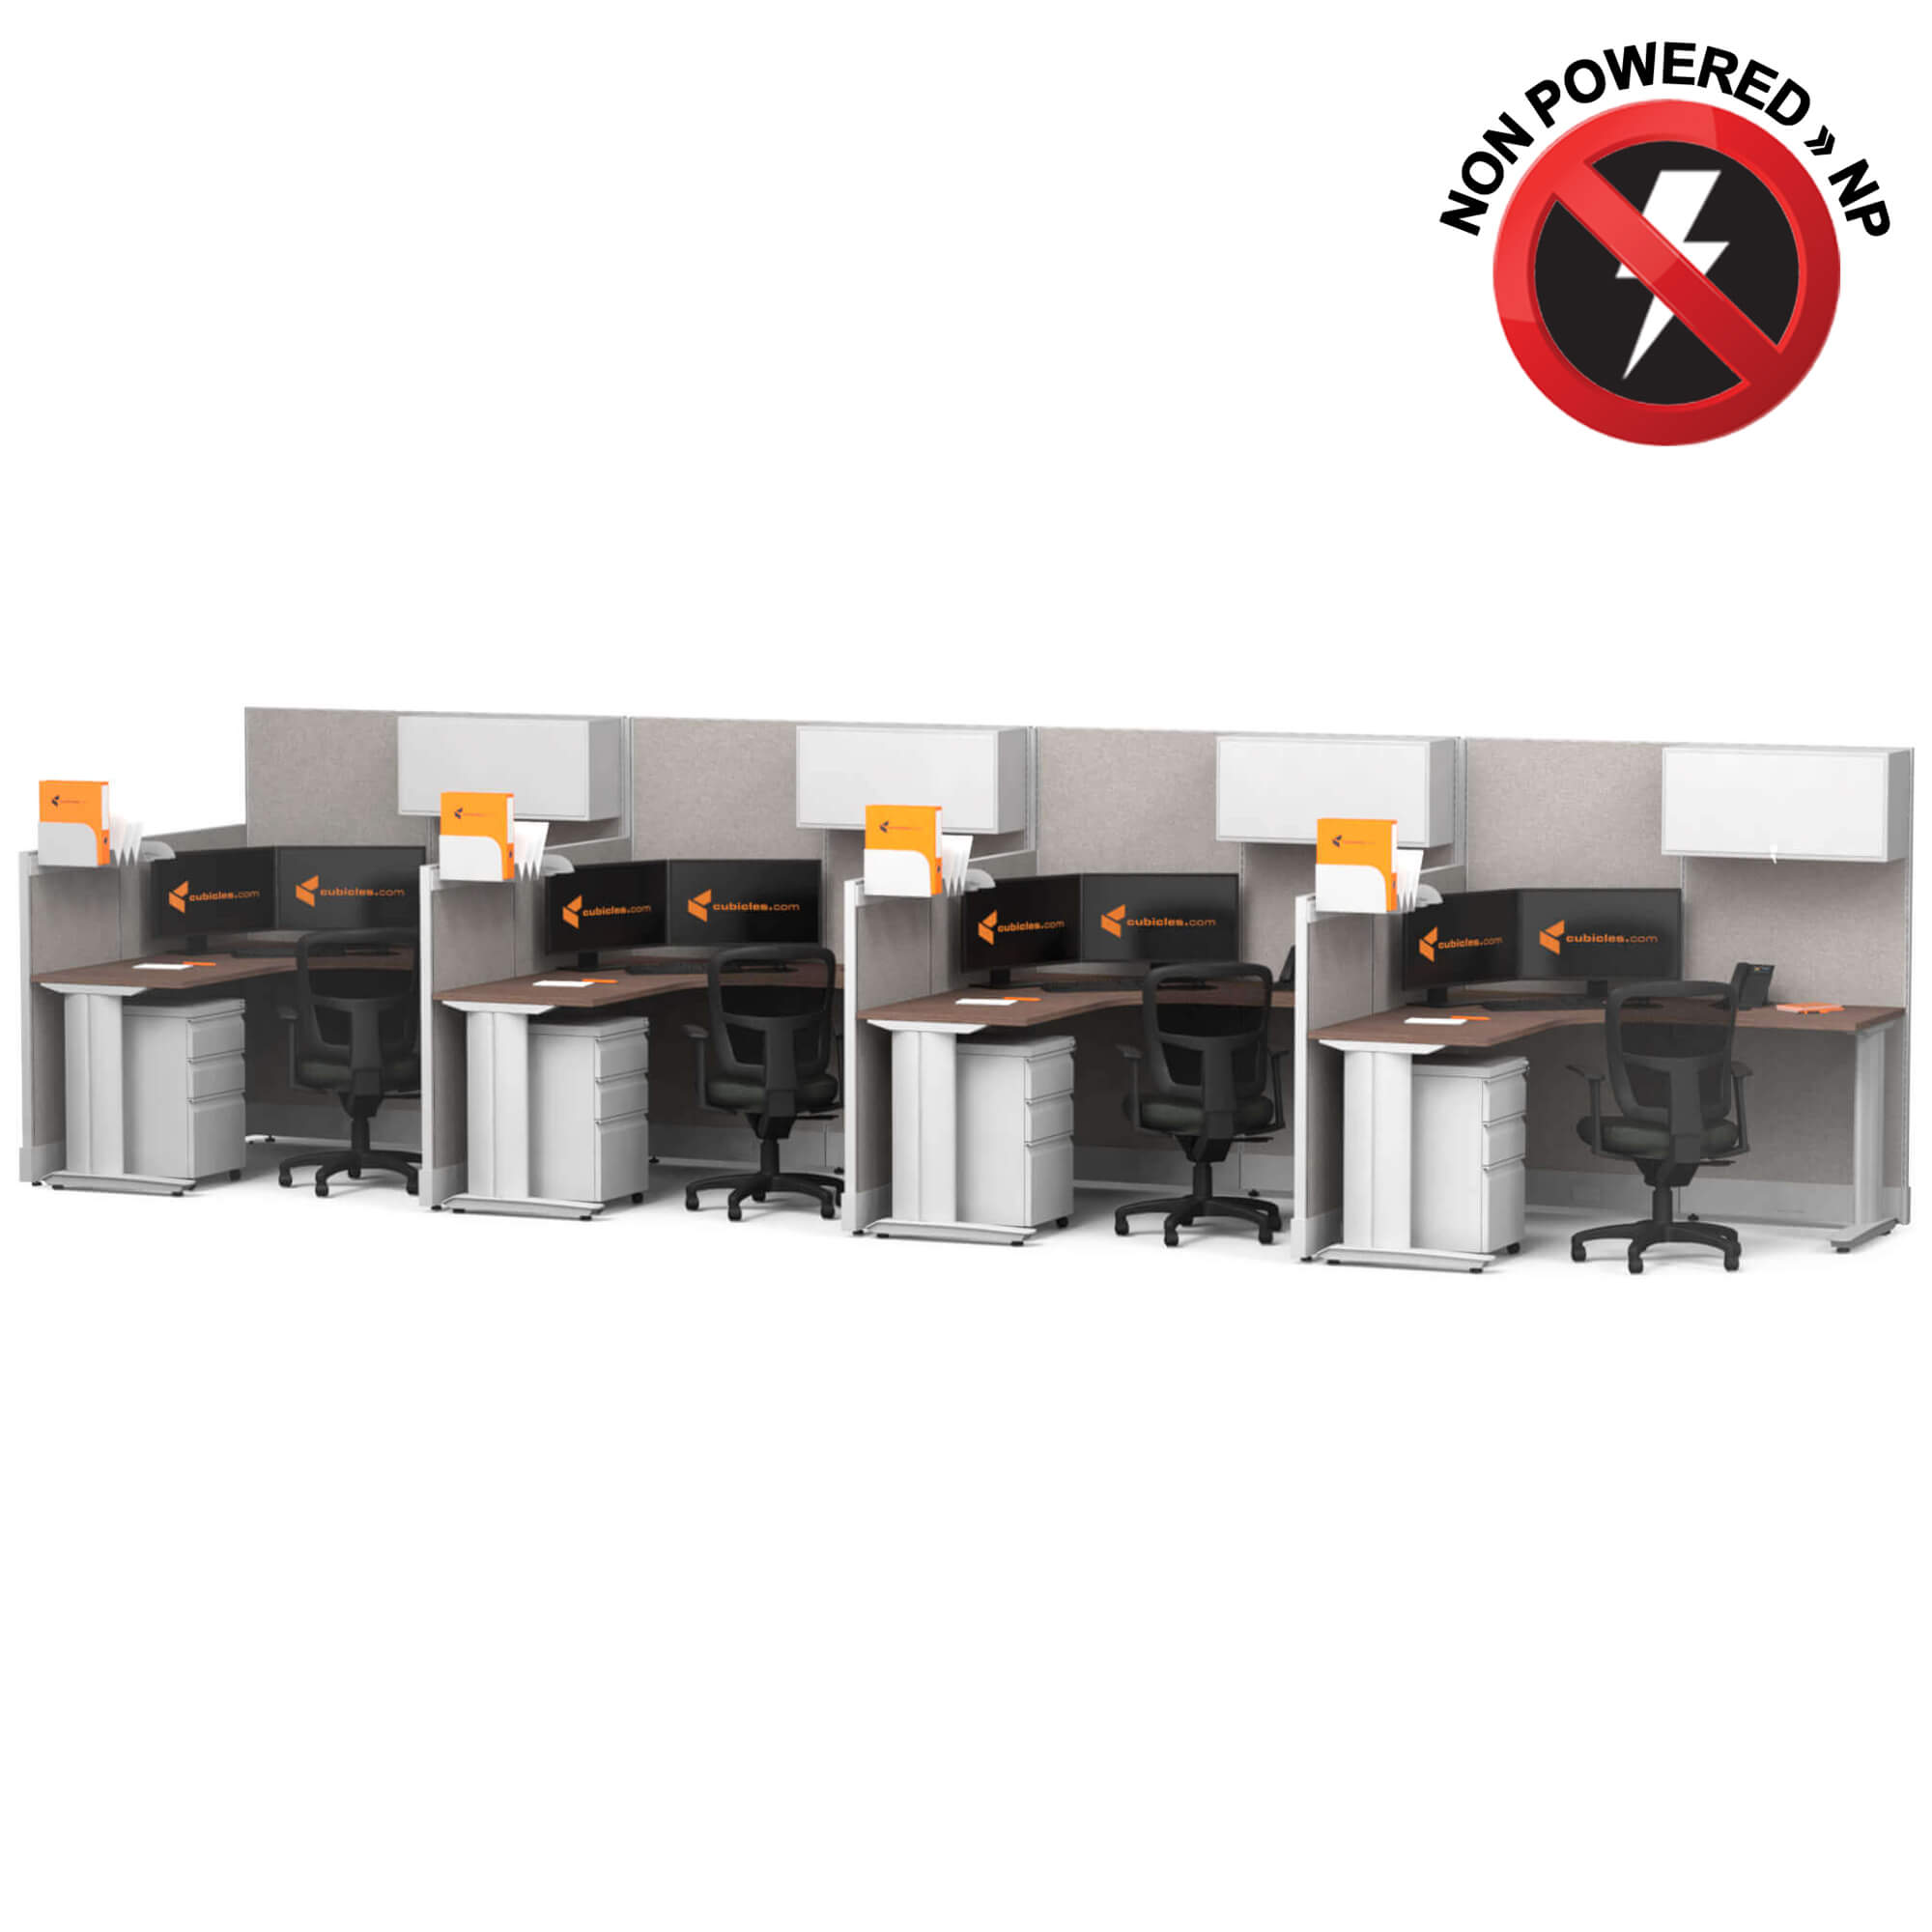 cubicle-desks-l-shaped-workstation-4pack-inline-non-powered-with-storage-sign.jpg